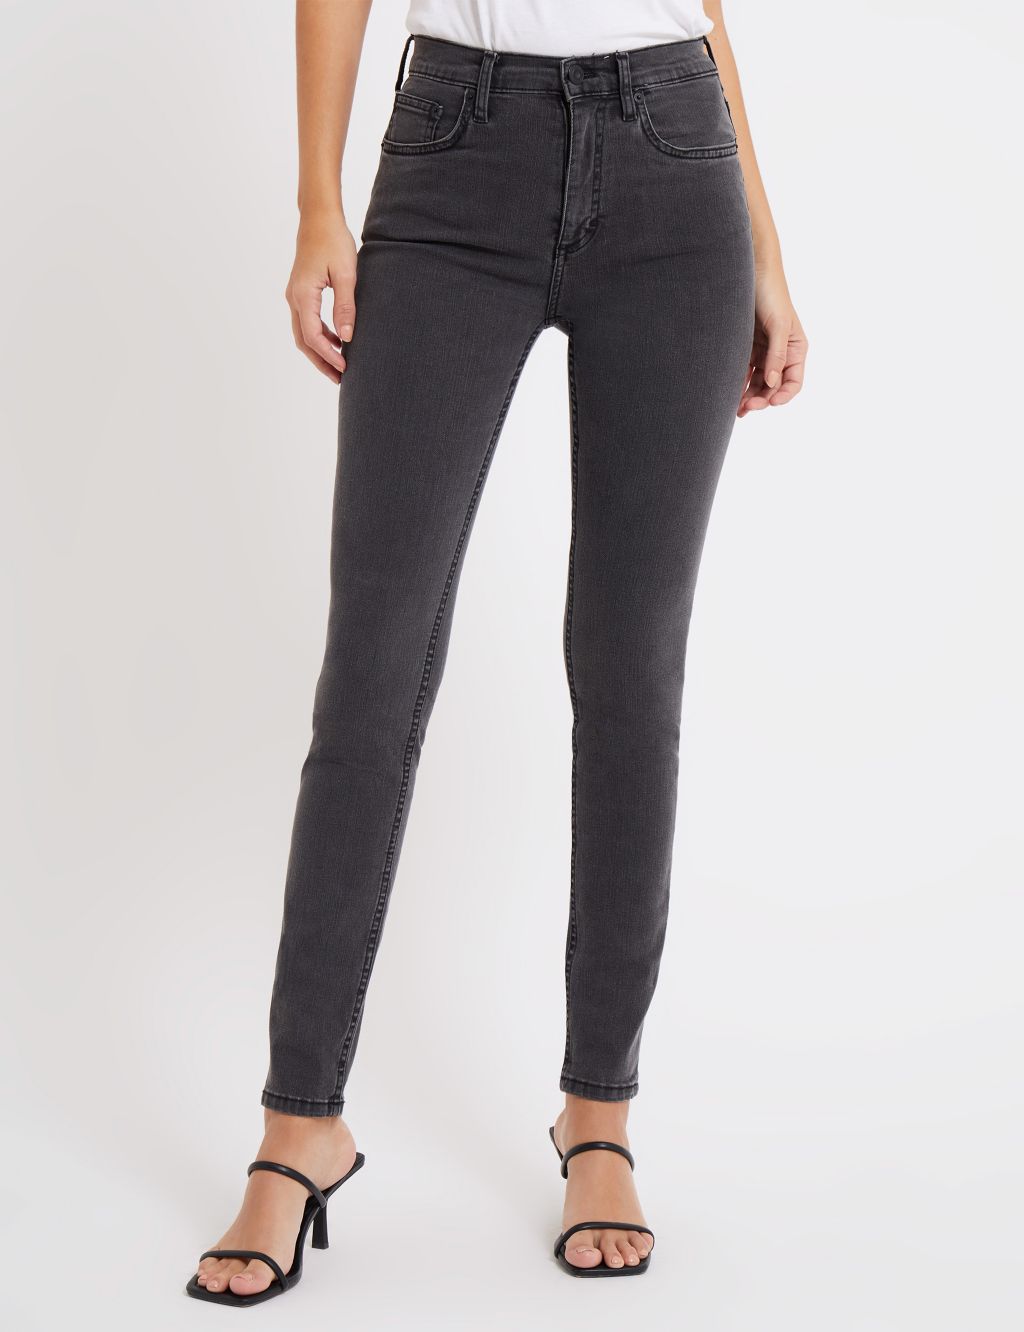 High Waisted Skinny Ankle Grazer Jeans image 1